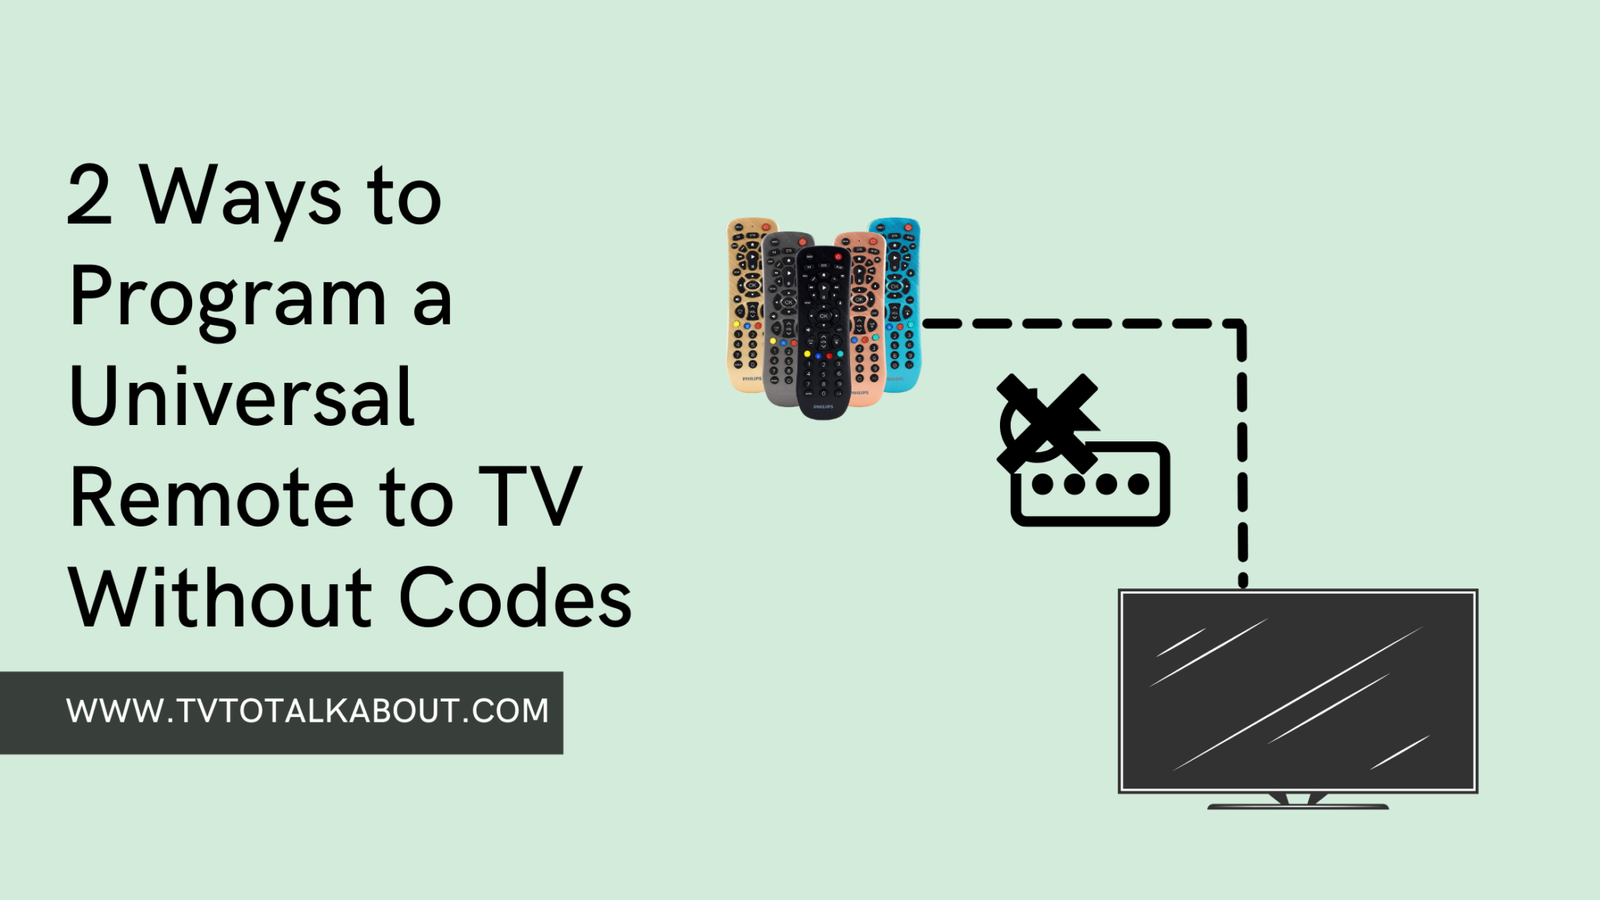 How to Program a Universal Remote to TV Without Codes TV To Talk About